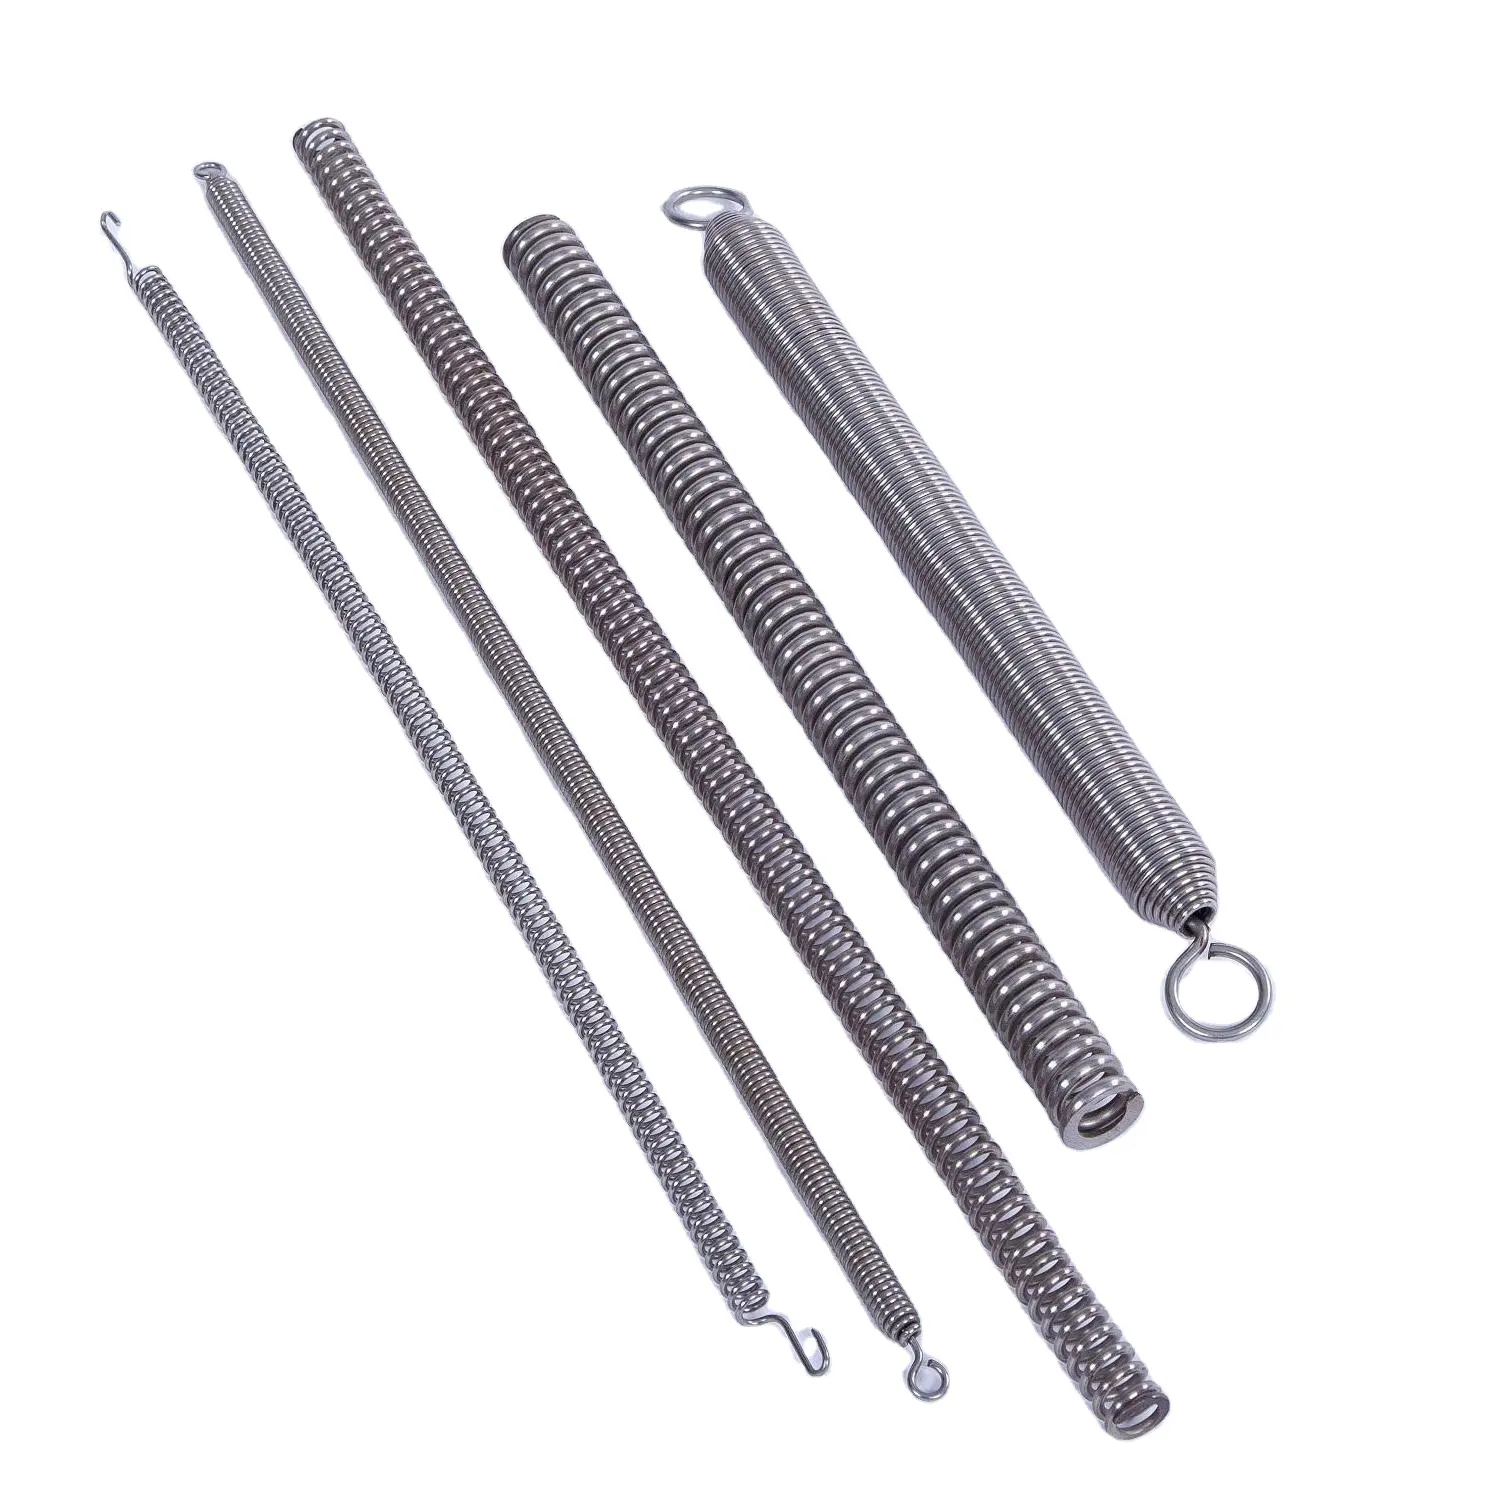 Parts Of Oil Drilling Production Equipment Long Length Inconel Alloy Compression Springs